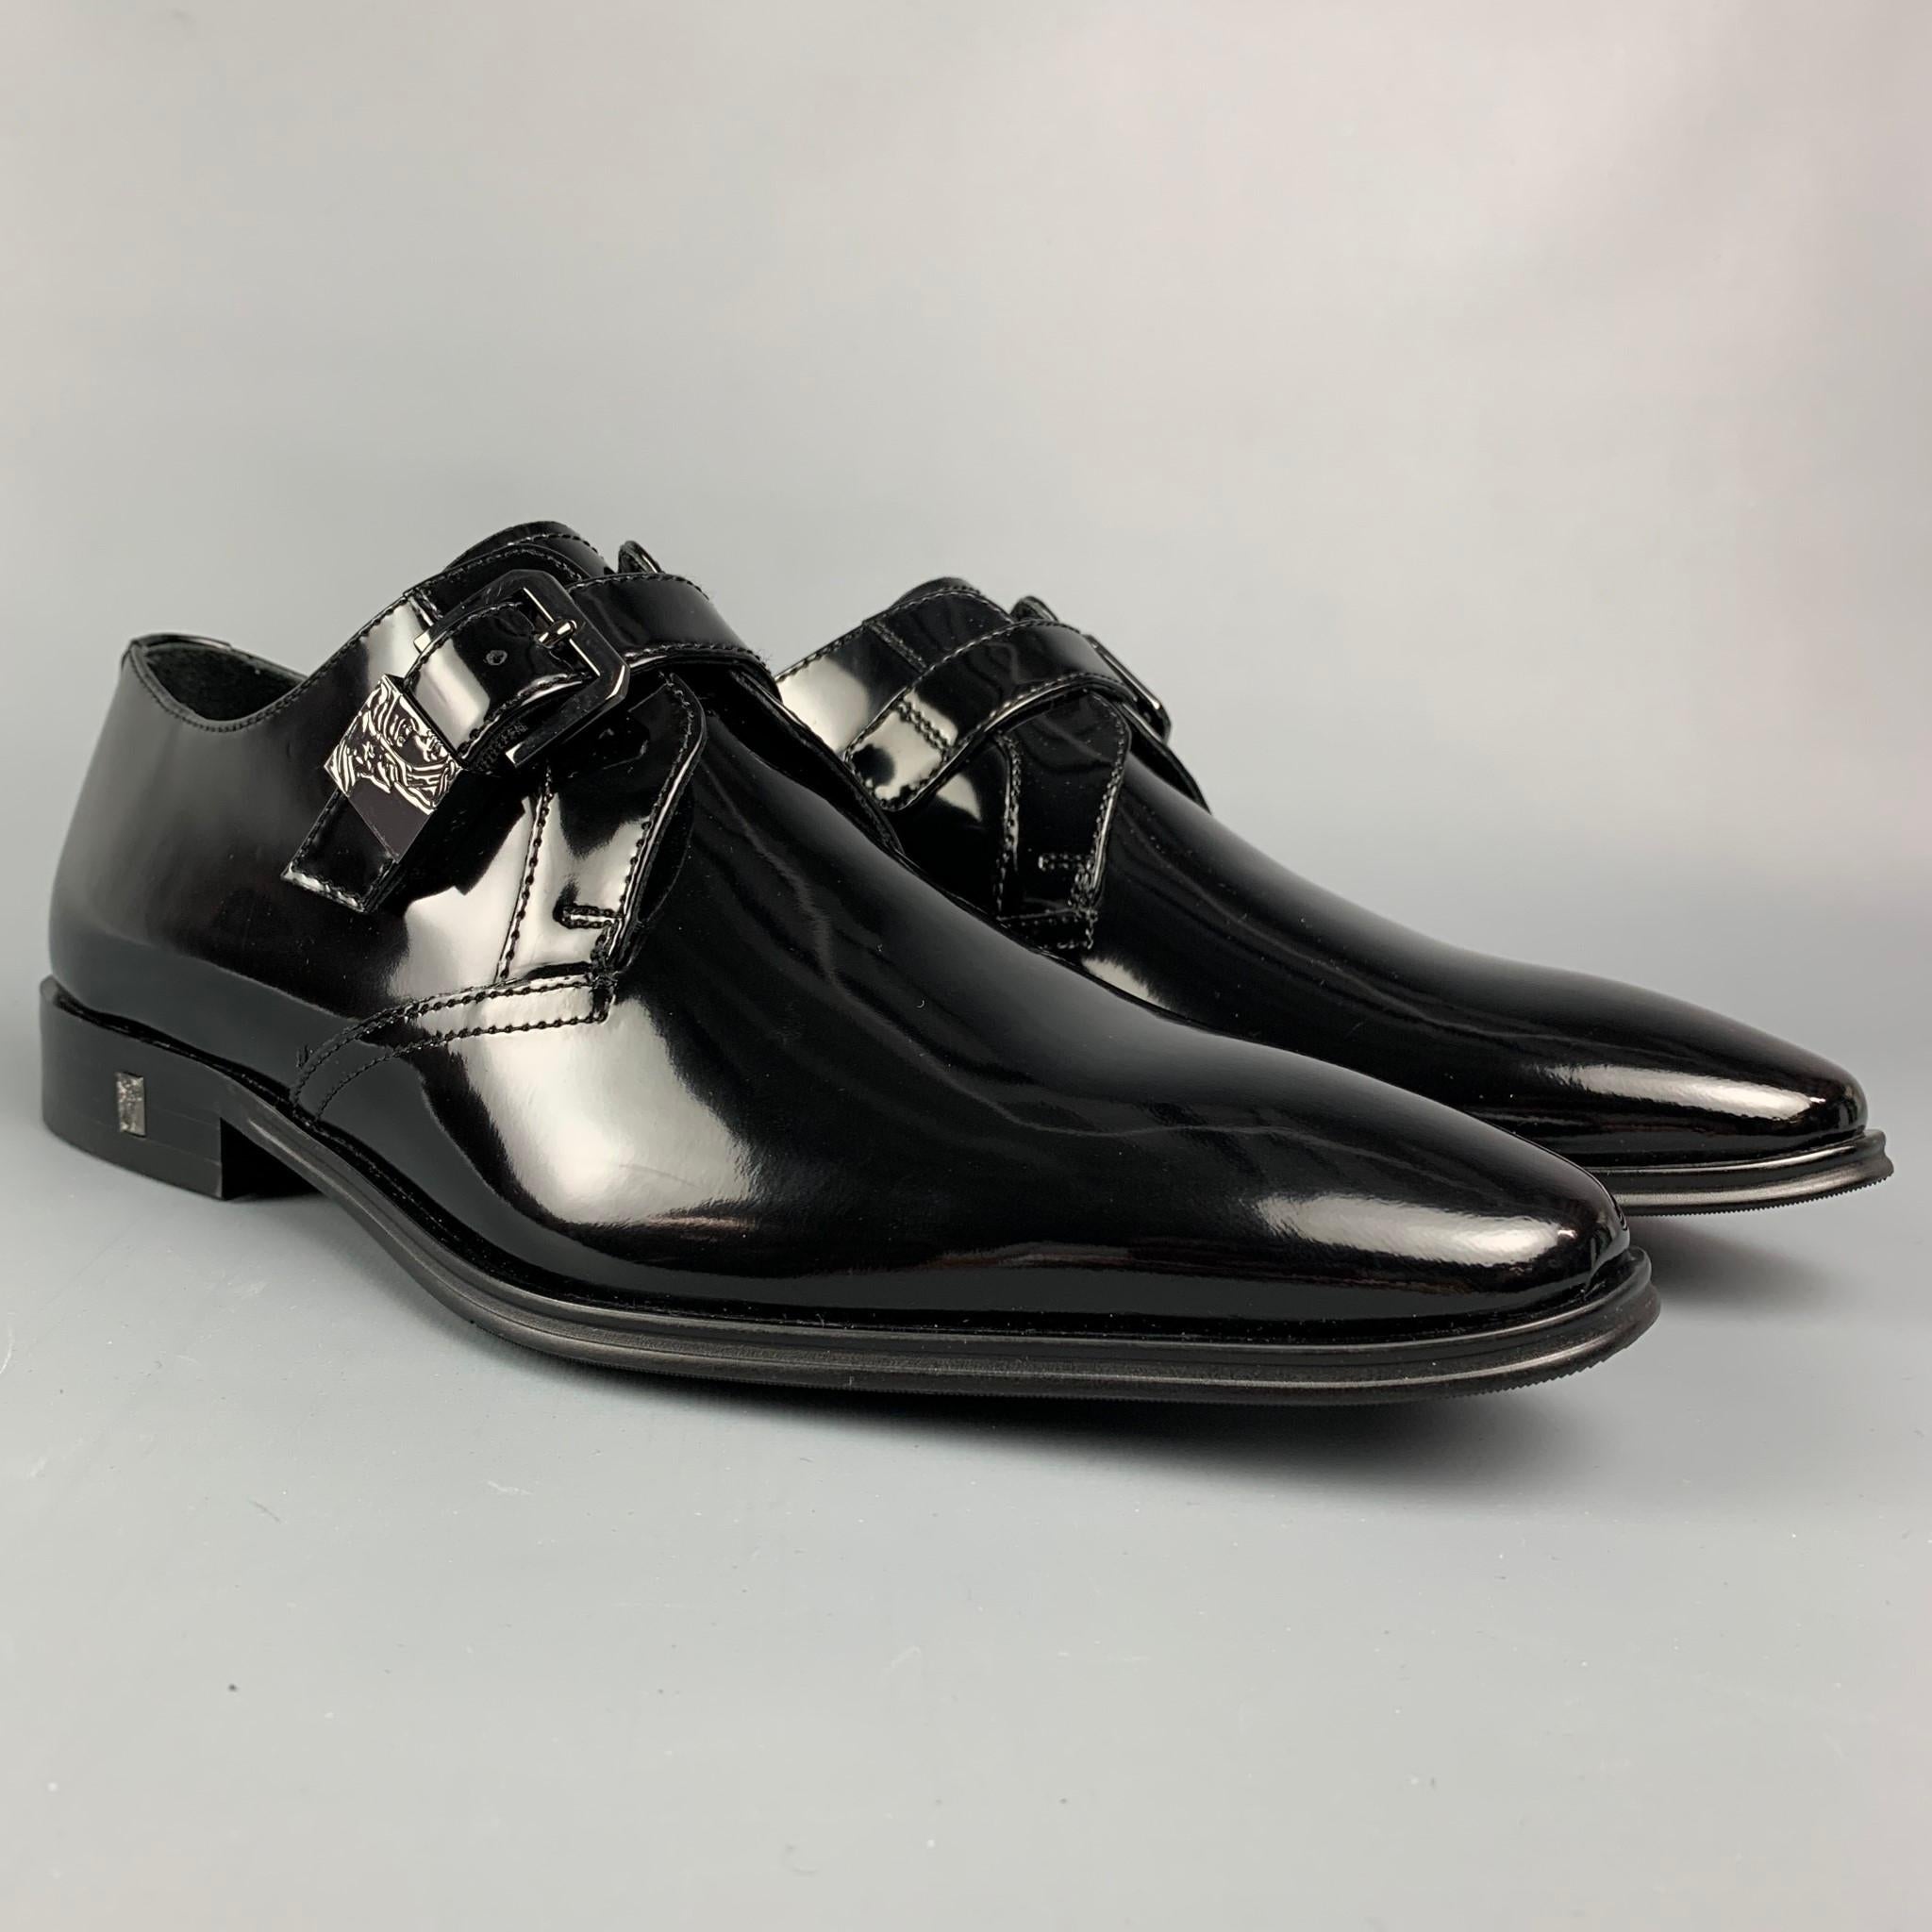 VERSACE COLLECTION loafers comes in a black patent leather featuring a gunmetal strap and a square toe. Comes with box. 

Excellent Pre-Owned Condition.
Marked: 40
Original Retail Price: $395.00

Outsole: 11.5 in. x 3.5 in.
